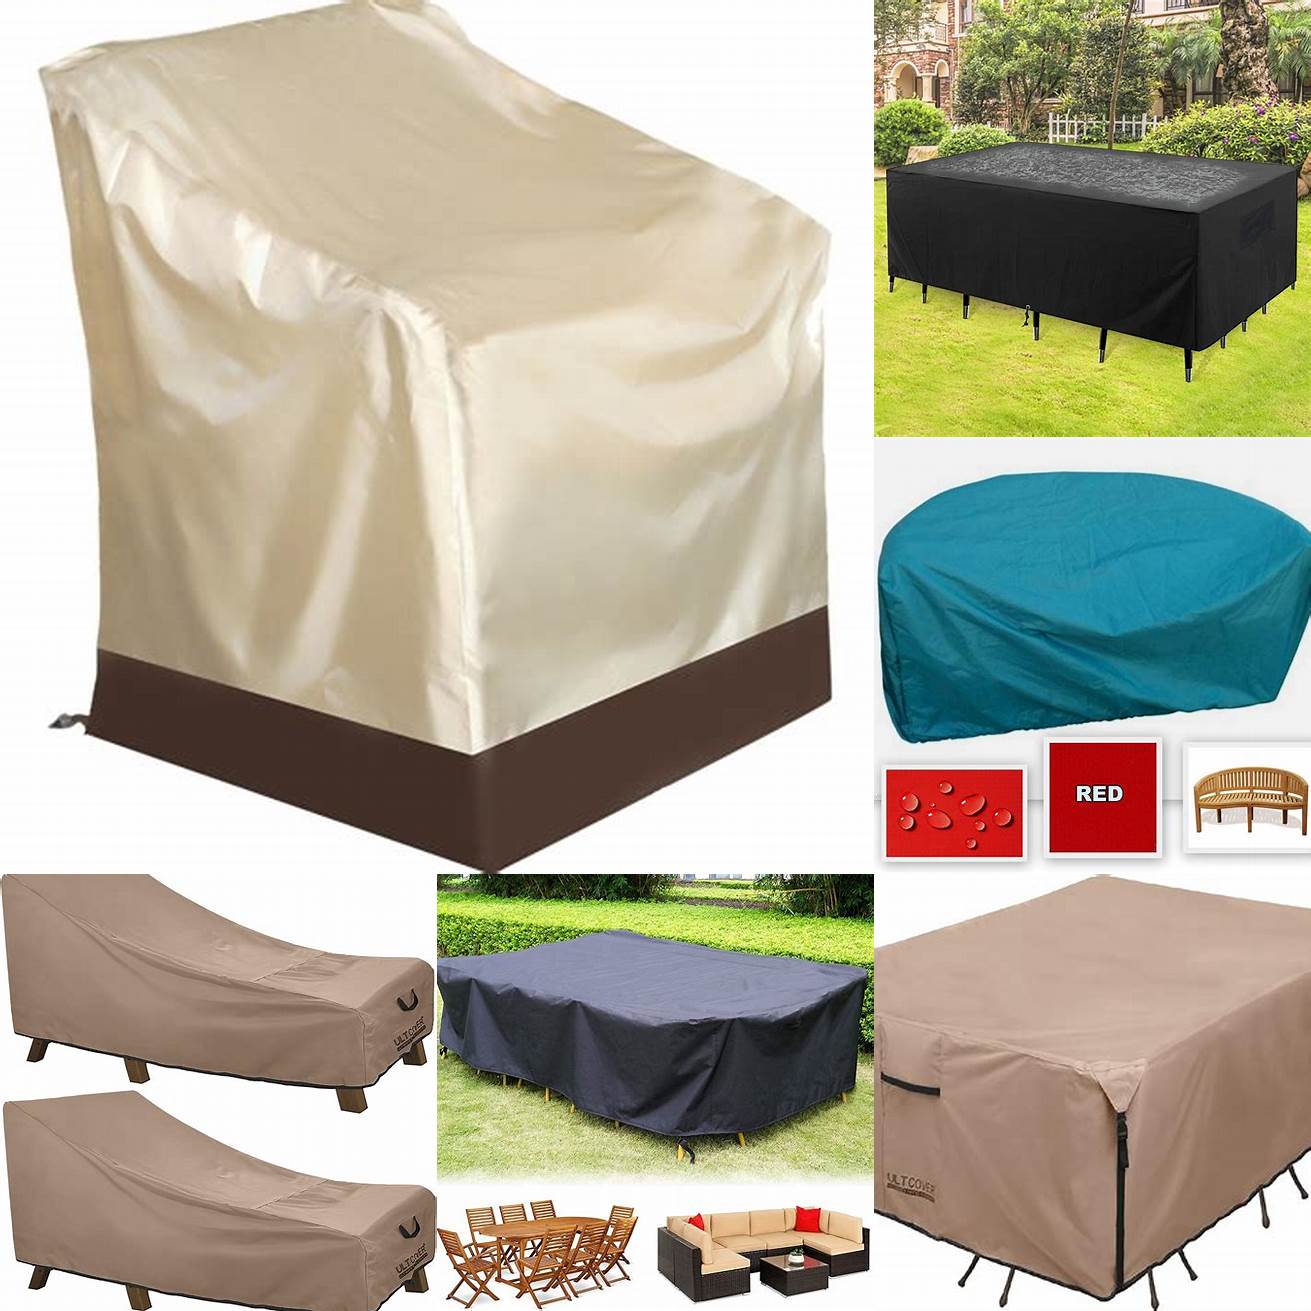 Covering Teak Furniture with a Waterproof Cover